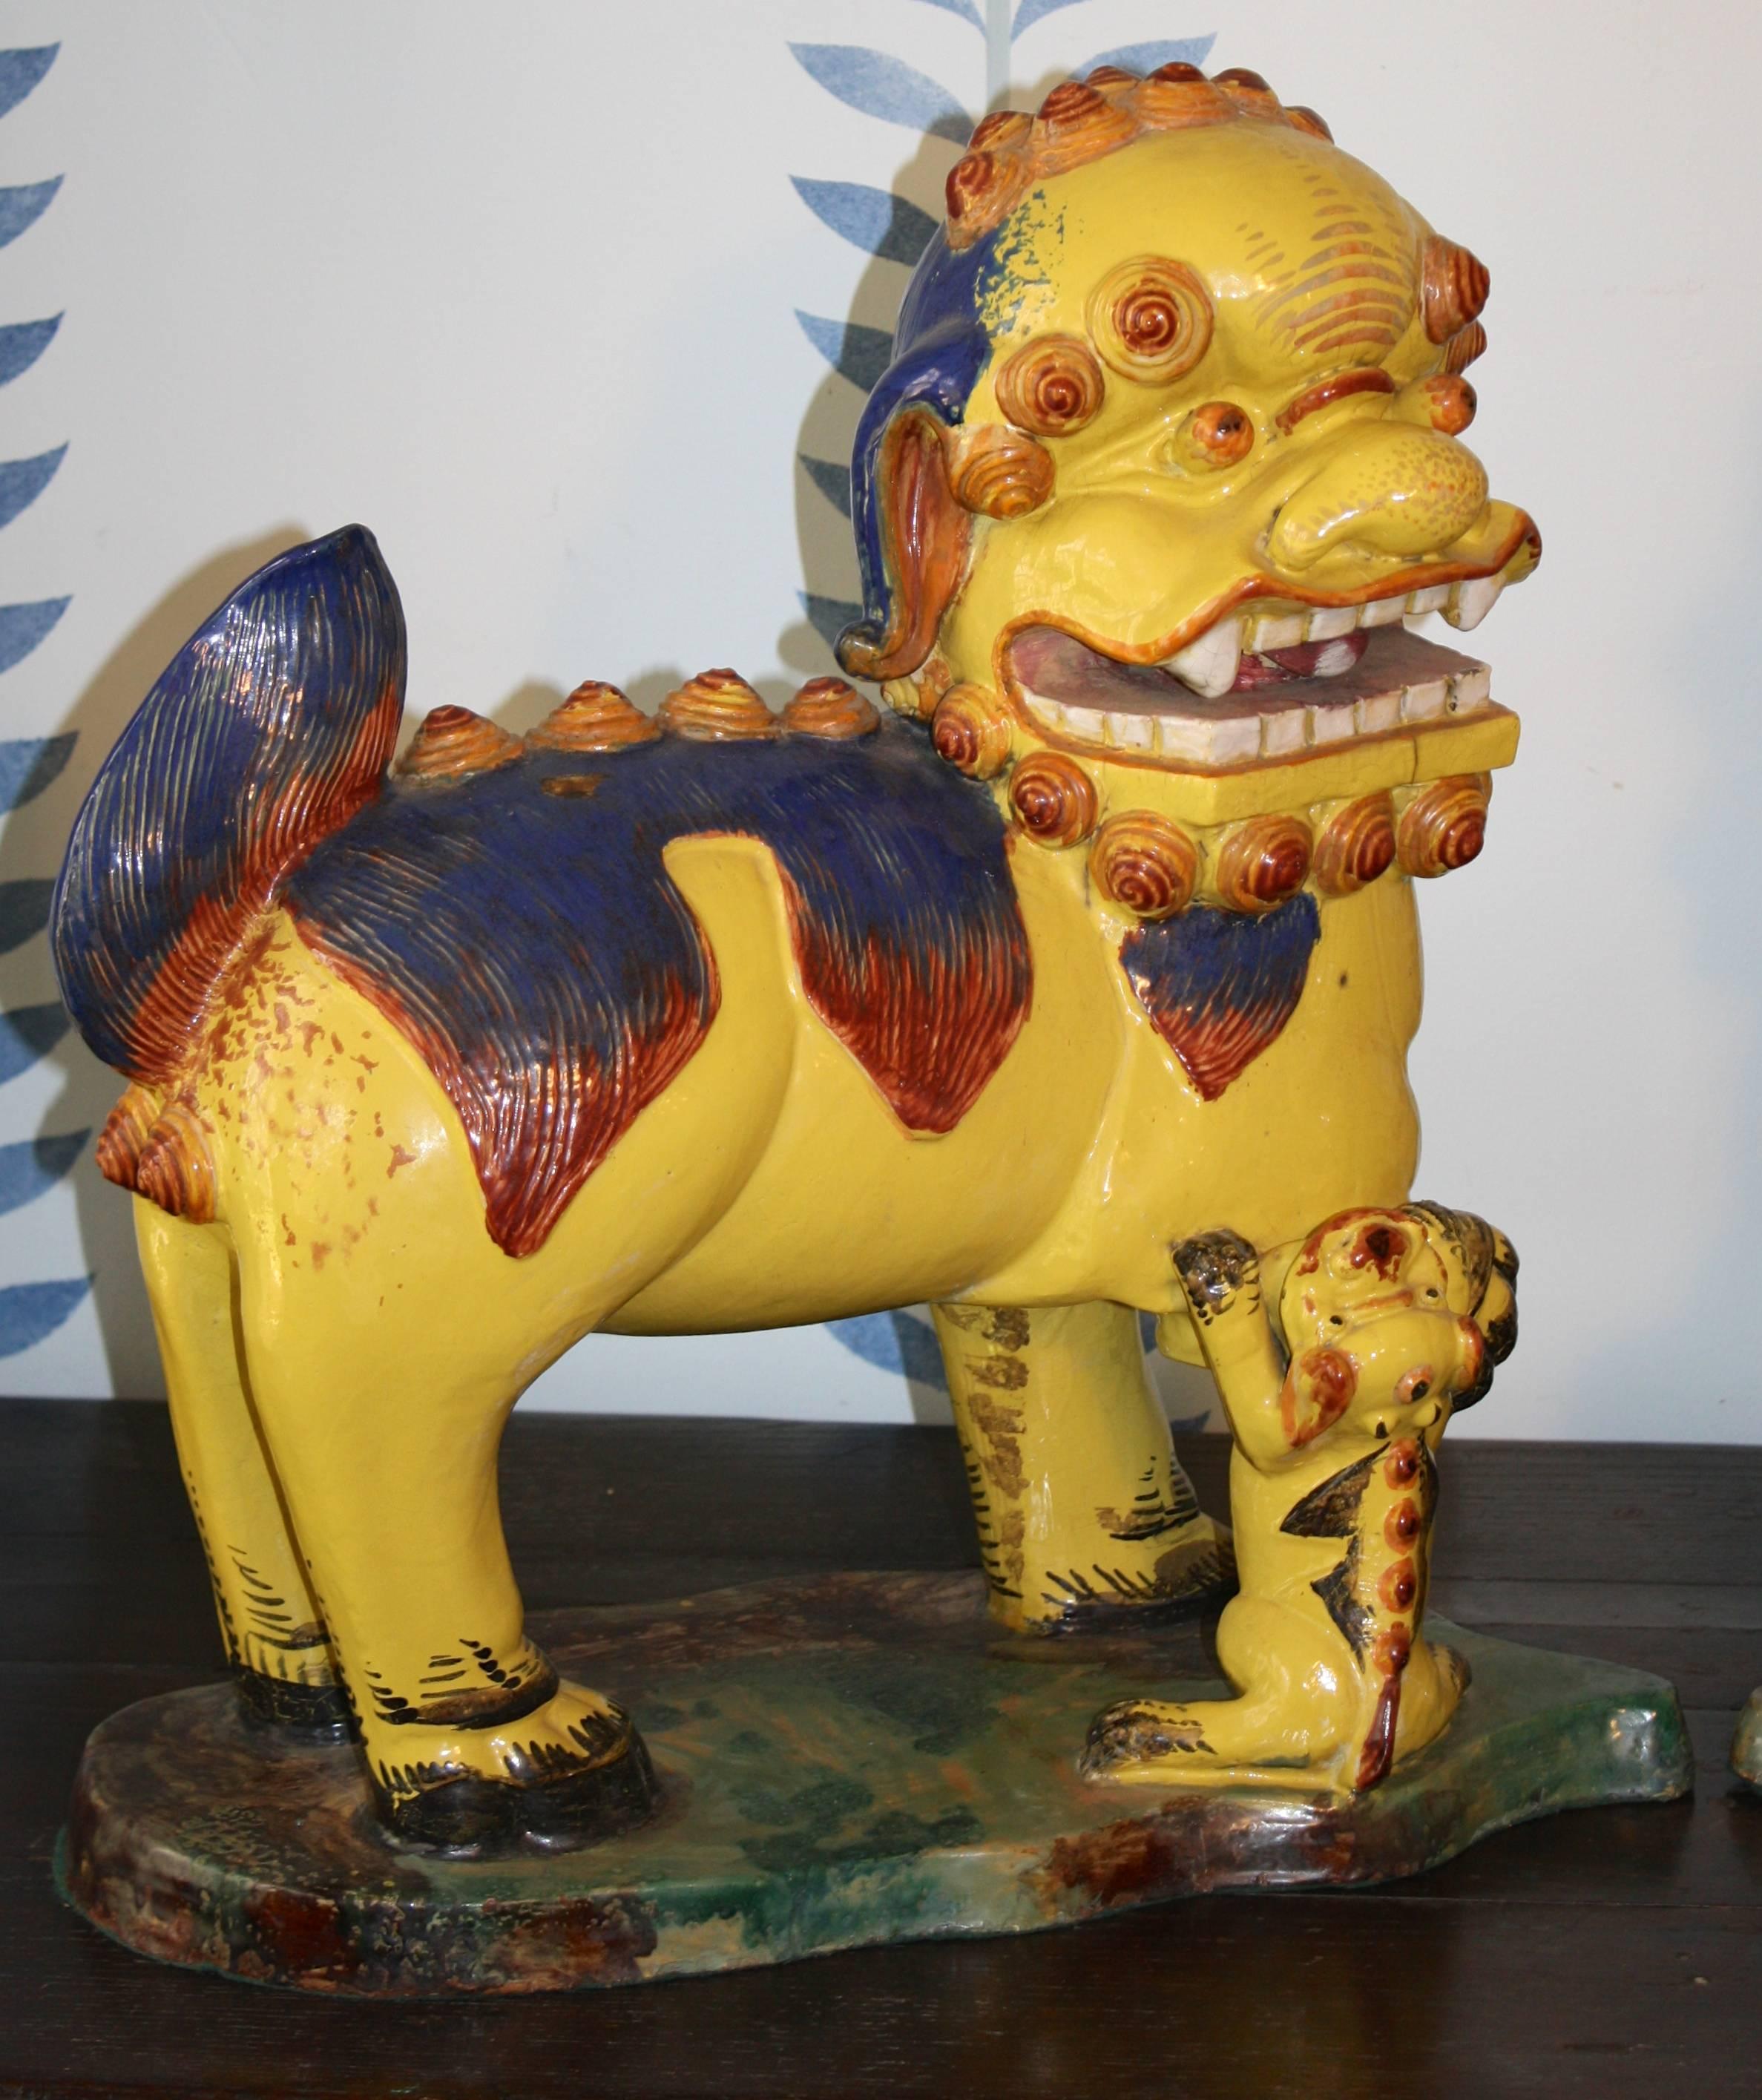 An oversized facing pair of ceramic pottery Fu Lionesses with cubs, dating from the last quarter of the 18th century Qing Dynasty at the kilns of Chiuchow;  a city in the eastern Guangdong province of the China. 
This Fu pair may be non-invasively